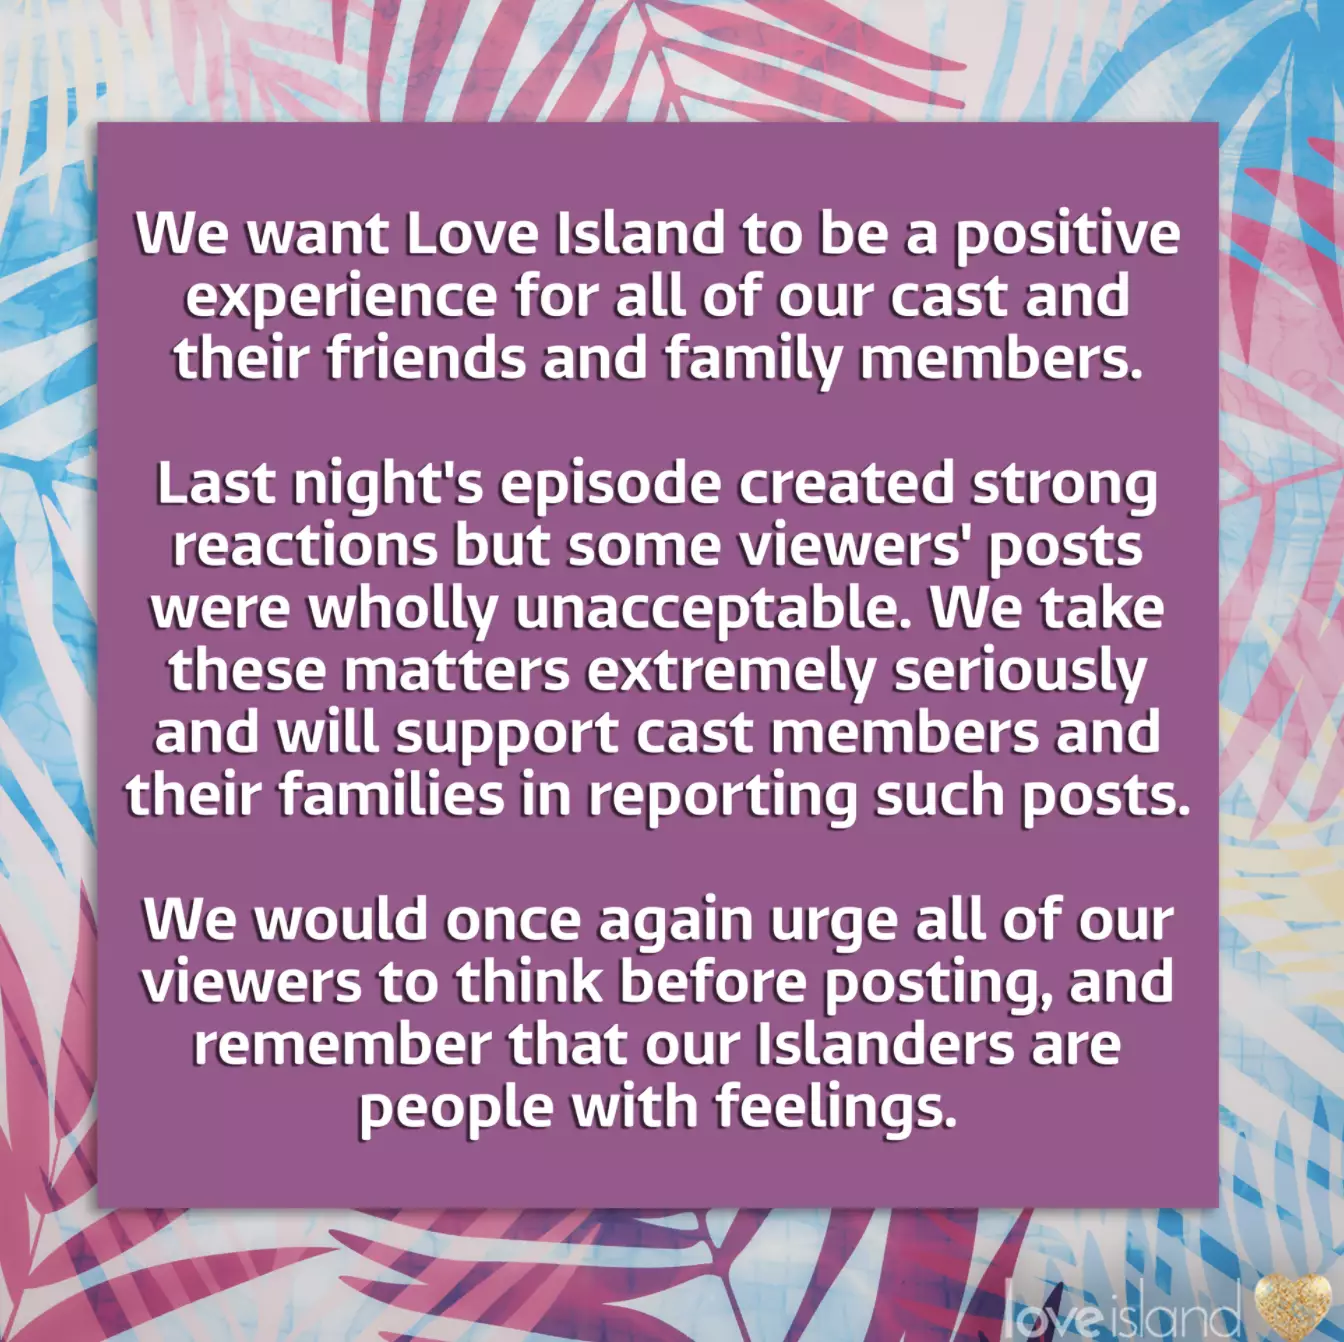 On Thursday evening, ITV took to Instagram with a statement (